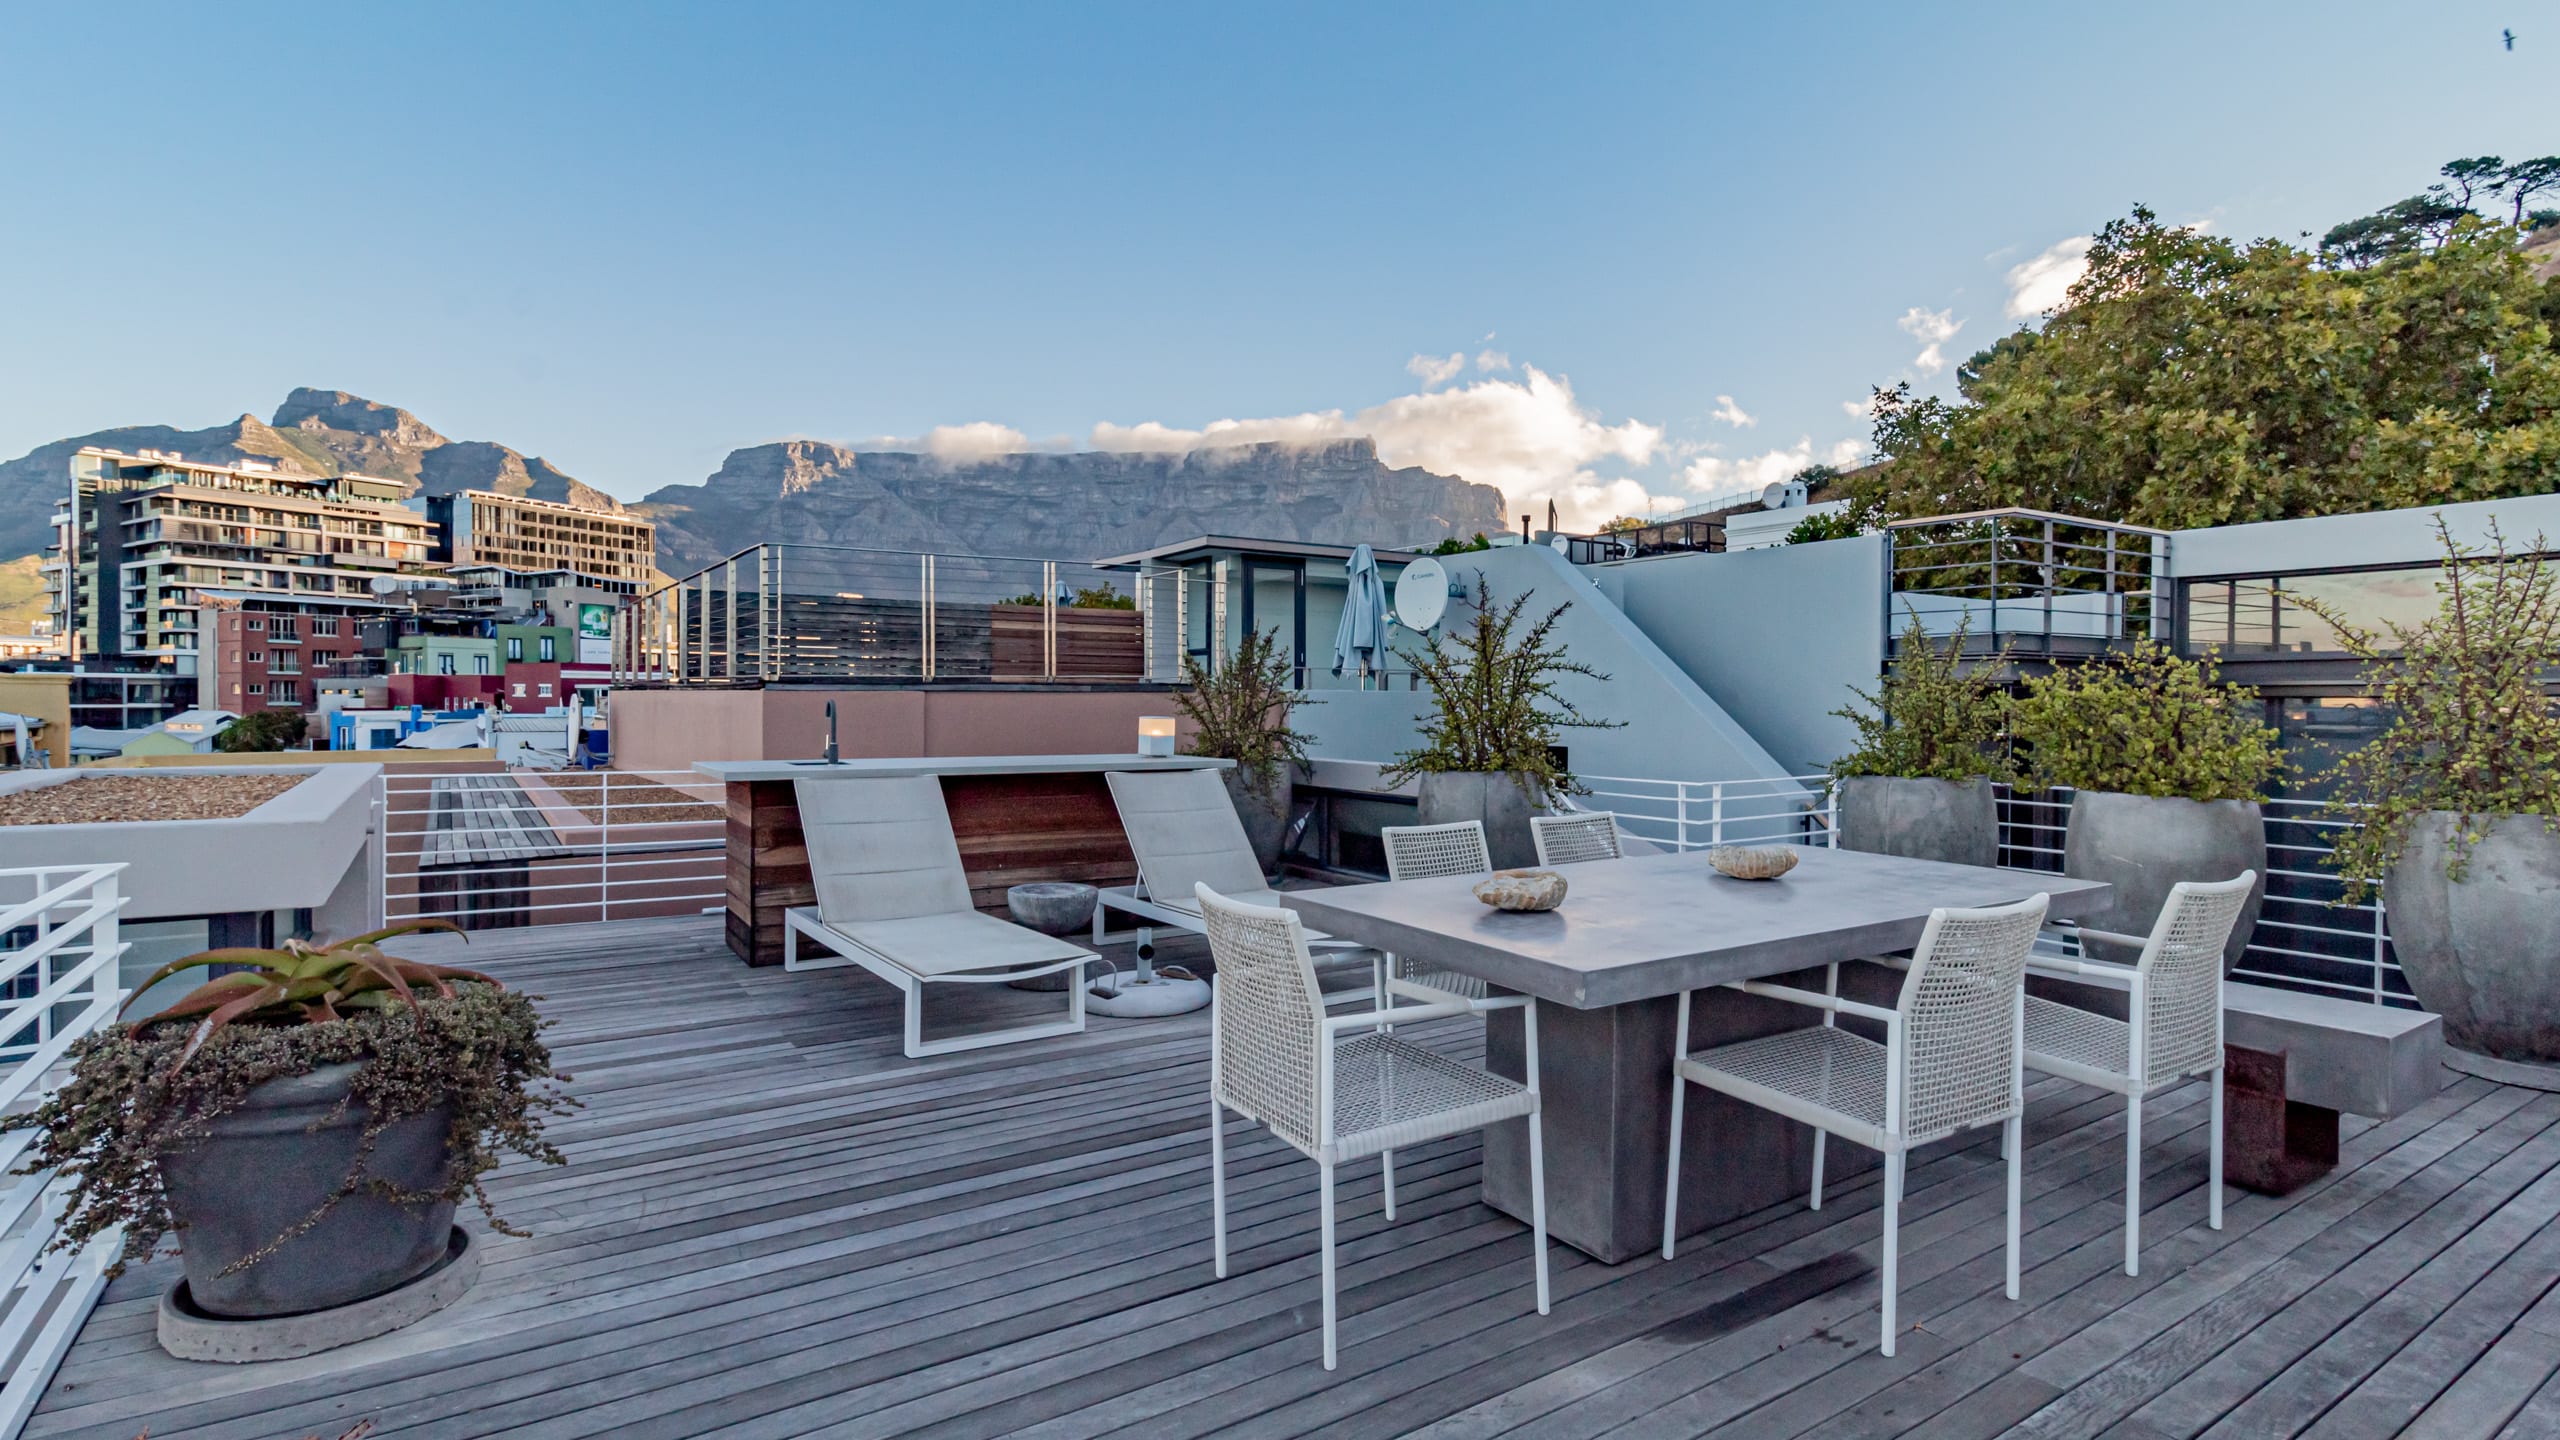 Stylish Apartment with Rooftop Deck Pool 53 Napier